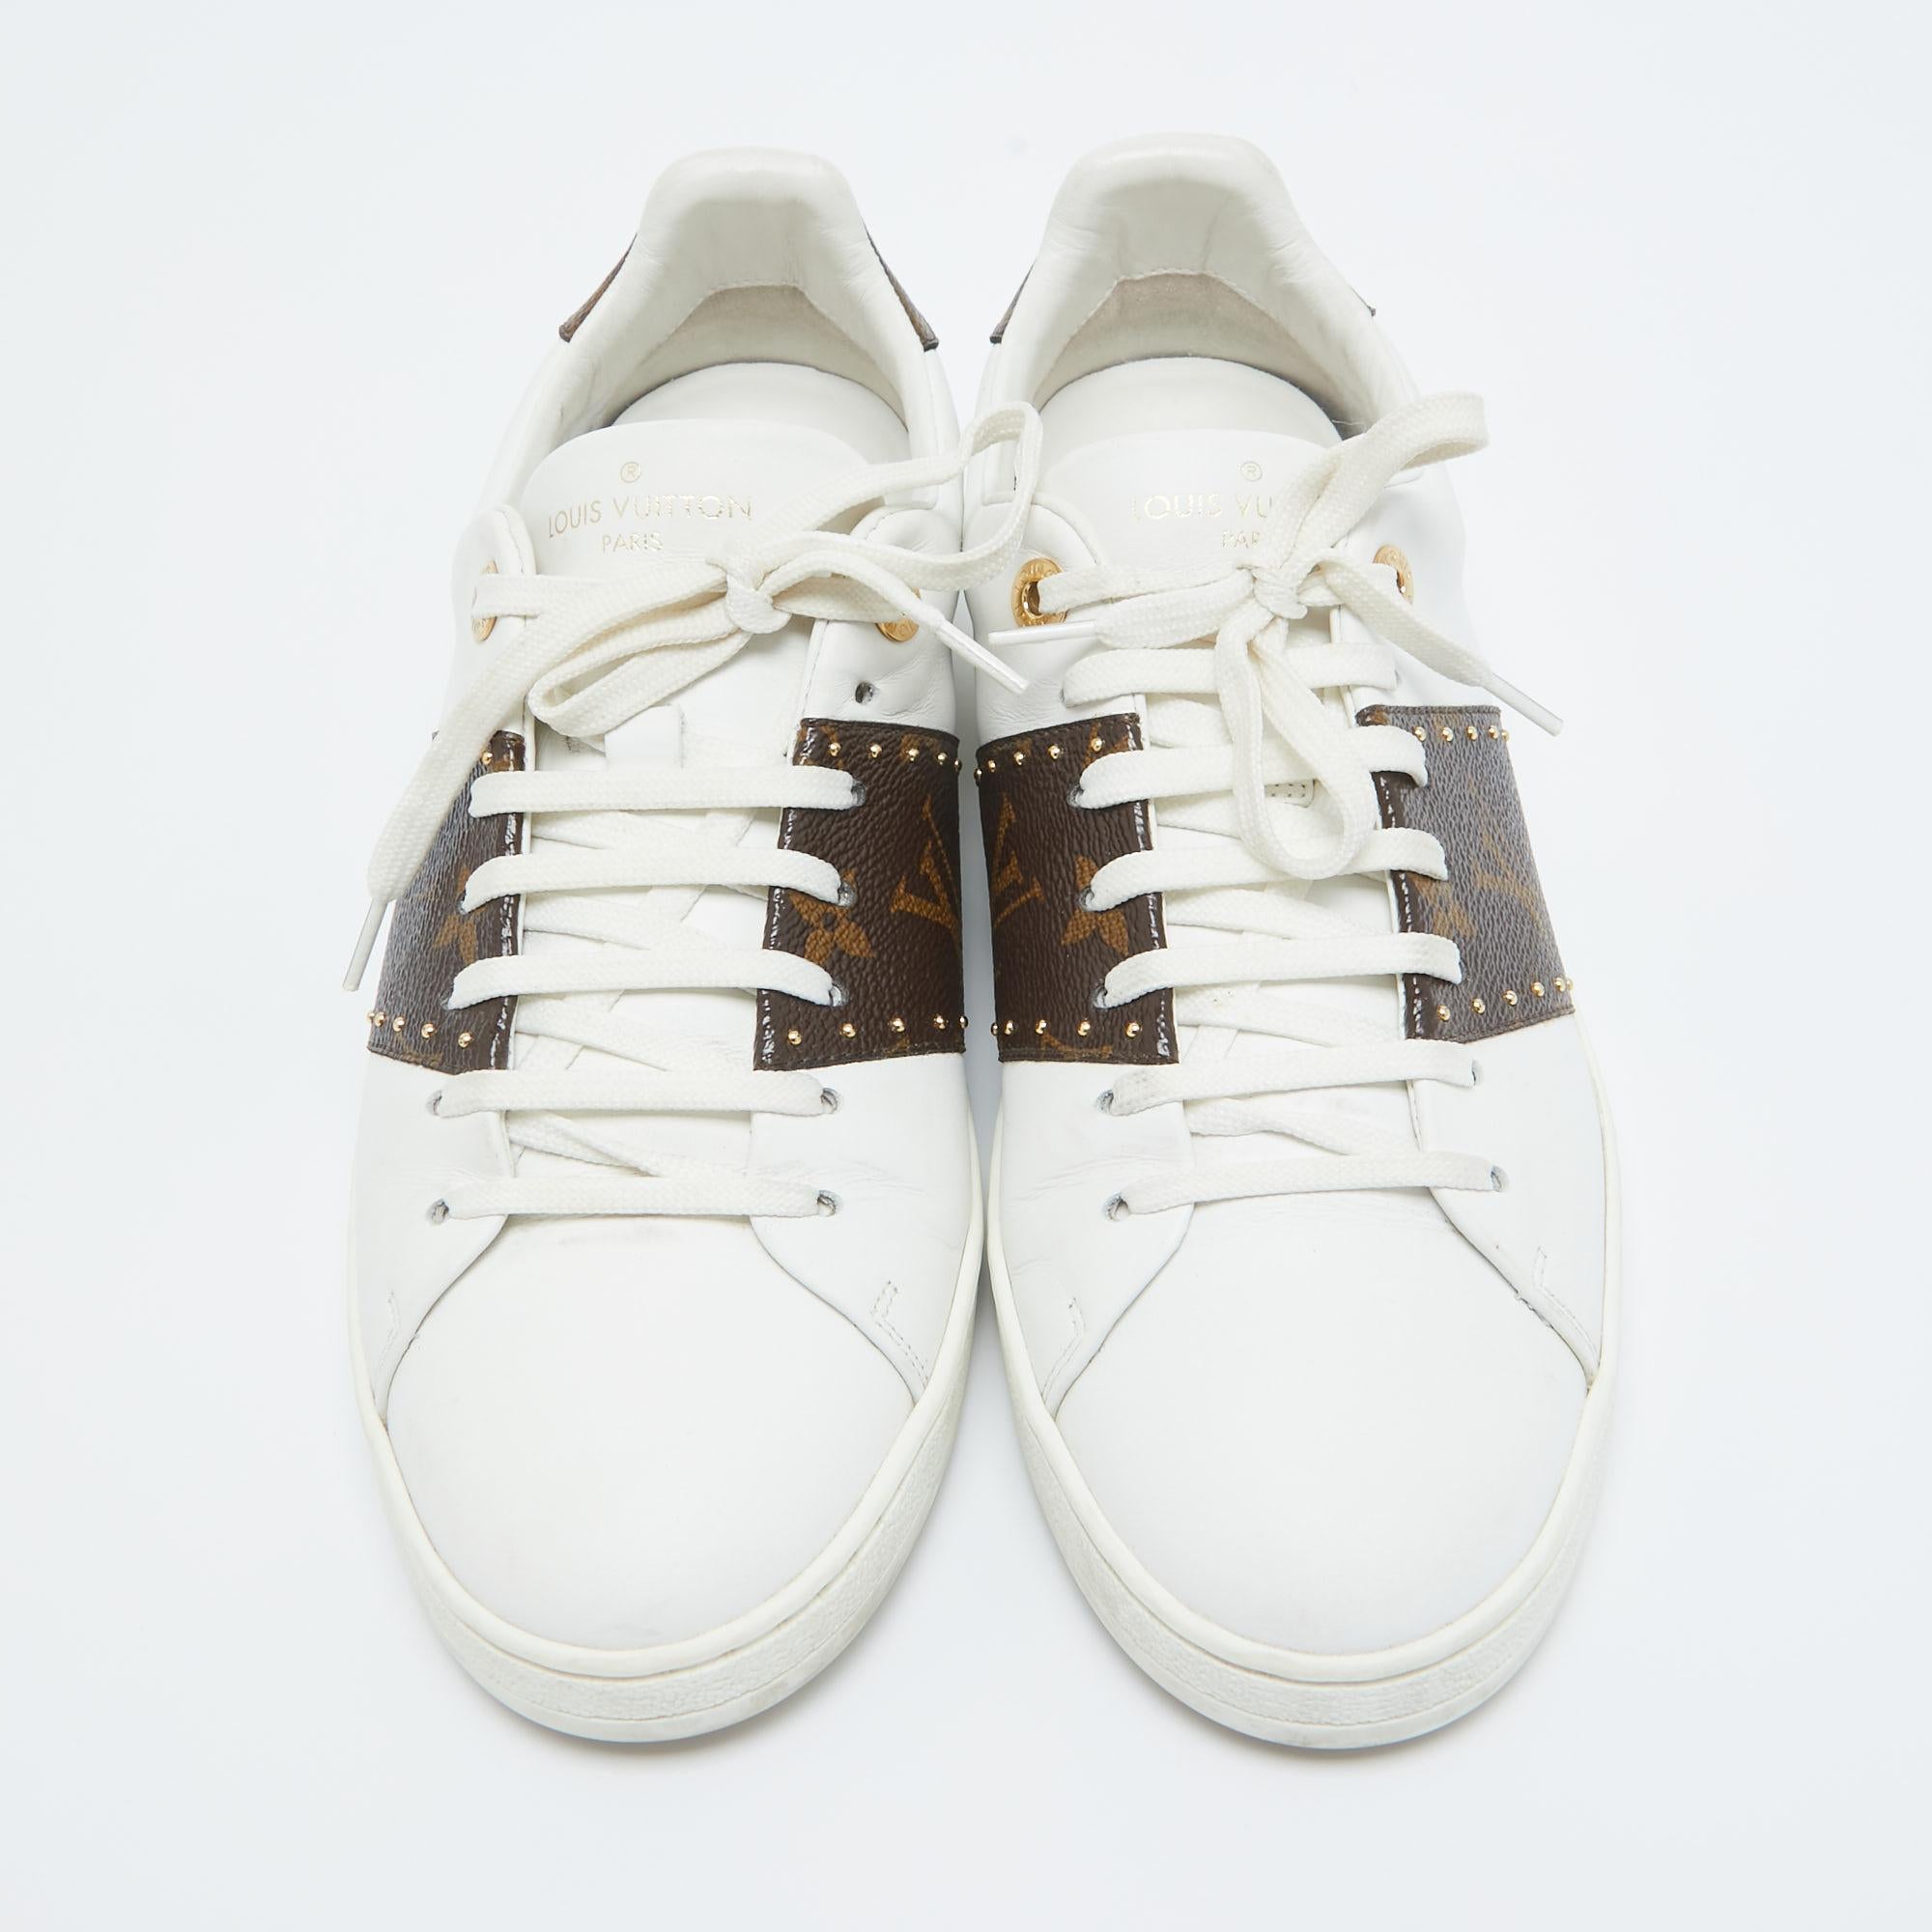 Give your outfit a luxe update with this pair of LV sneakers. The shoes are sewn perfectly to help you make a statement in them for a long time.

Includes: Original Box, Original Dustbag

